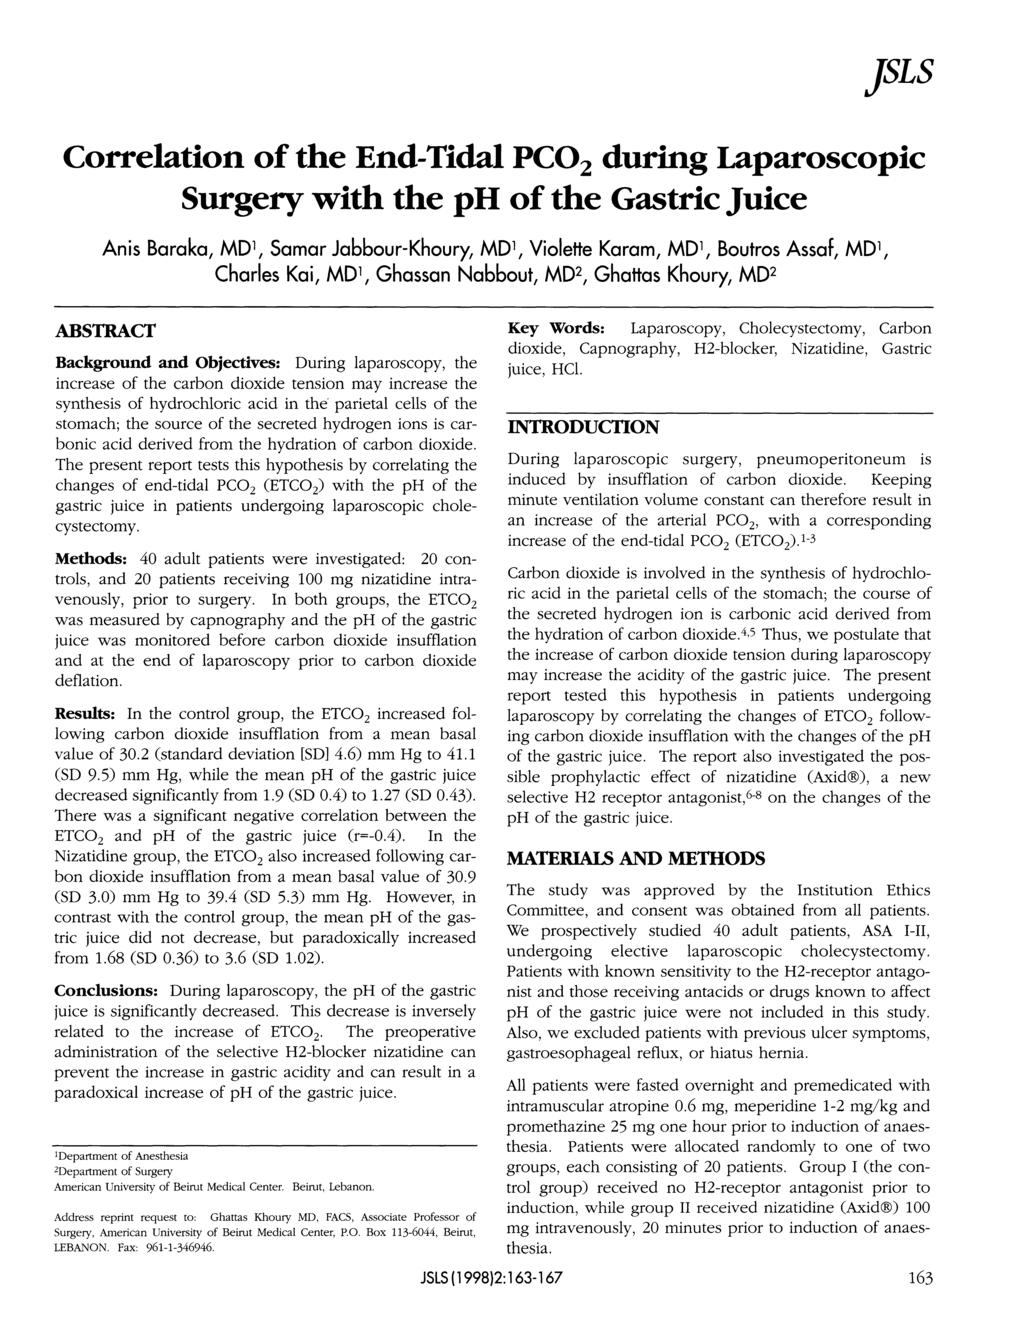 JSLS Correlation of the End-Tidal PCO 2 during Laparoscopic Surgery with the of the Gastric Juice Anis Baraka, MD 1, Samar Jabbour-Khoury, MD 1, Violette Karam, MD 1, Boutros Assaf, MD 1, Charles